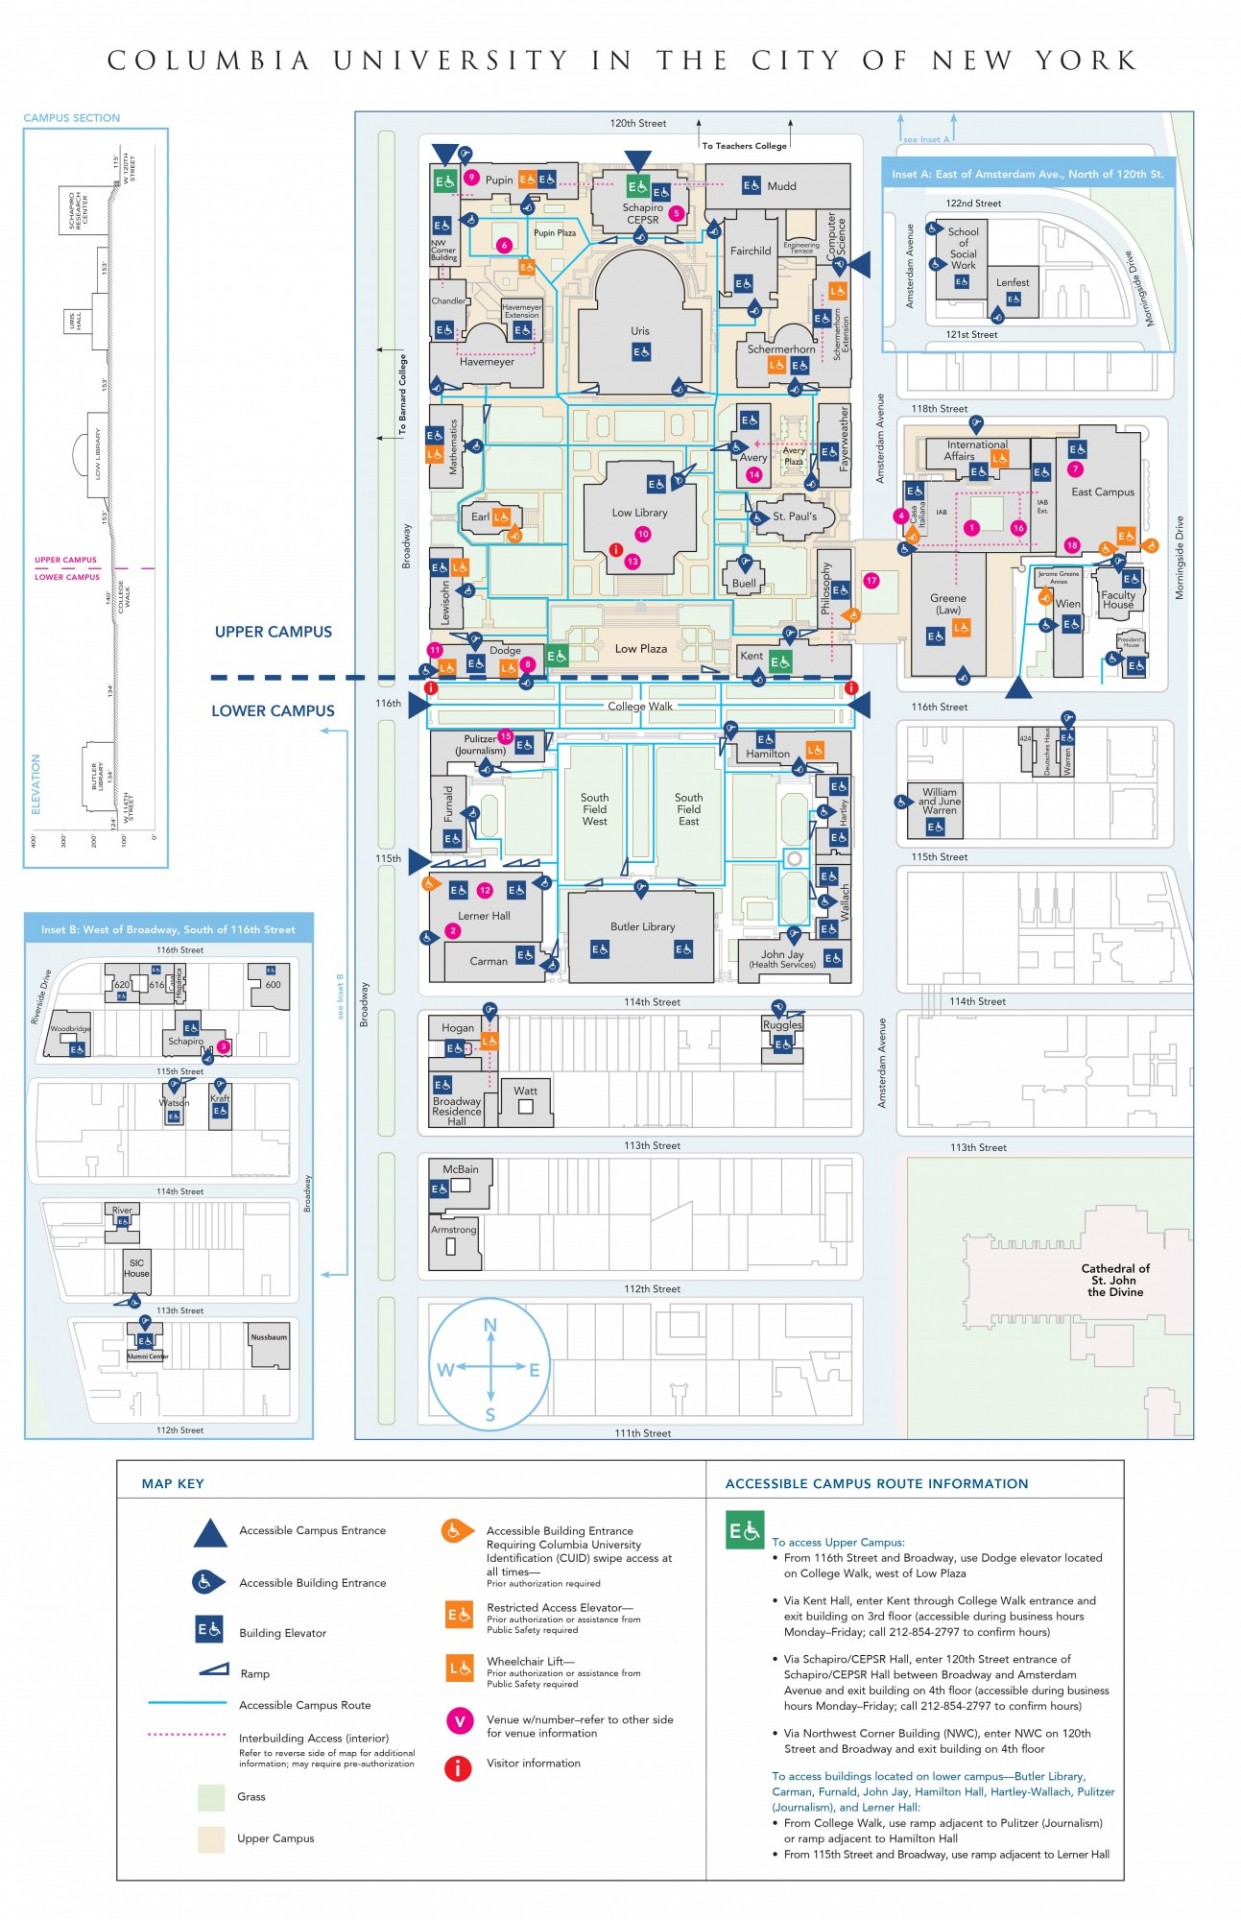 Accessibility map of Columbia's campus